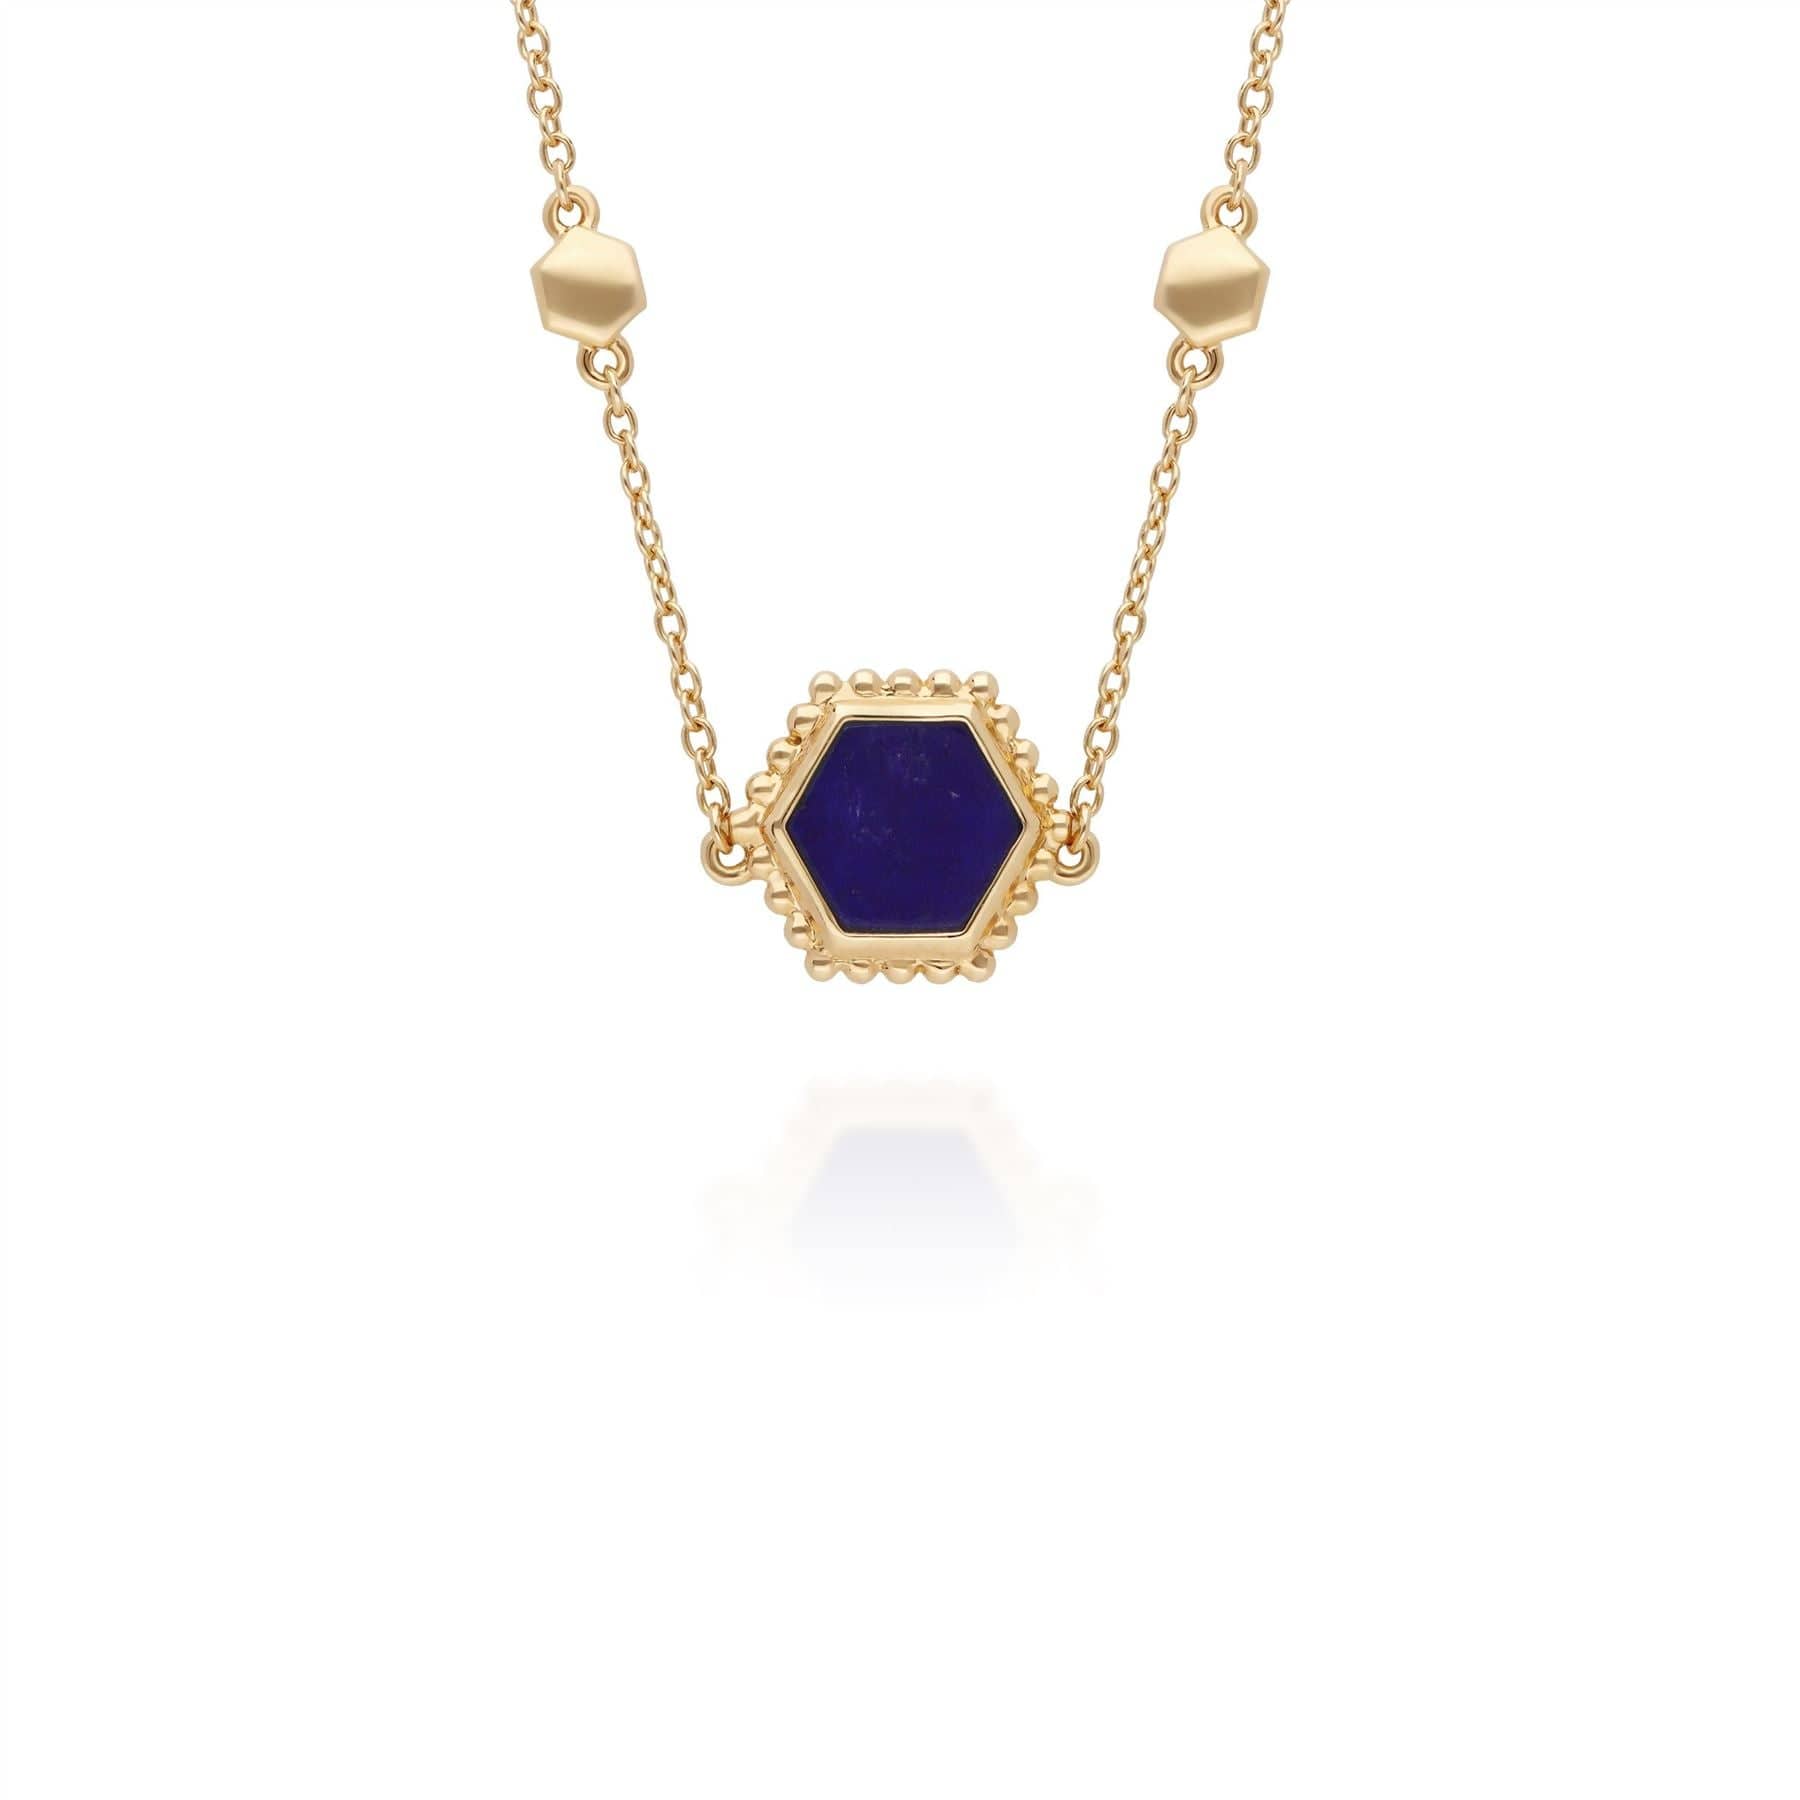 Photos - Pendant / Choker Necklace Lapis Lazuli Slice Chain Necklace in Yellow Gold Plated Sterling Silver